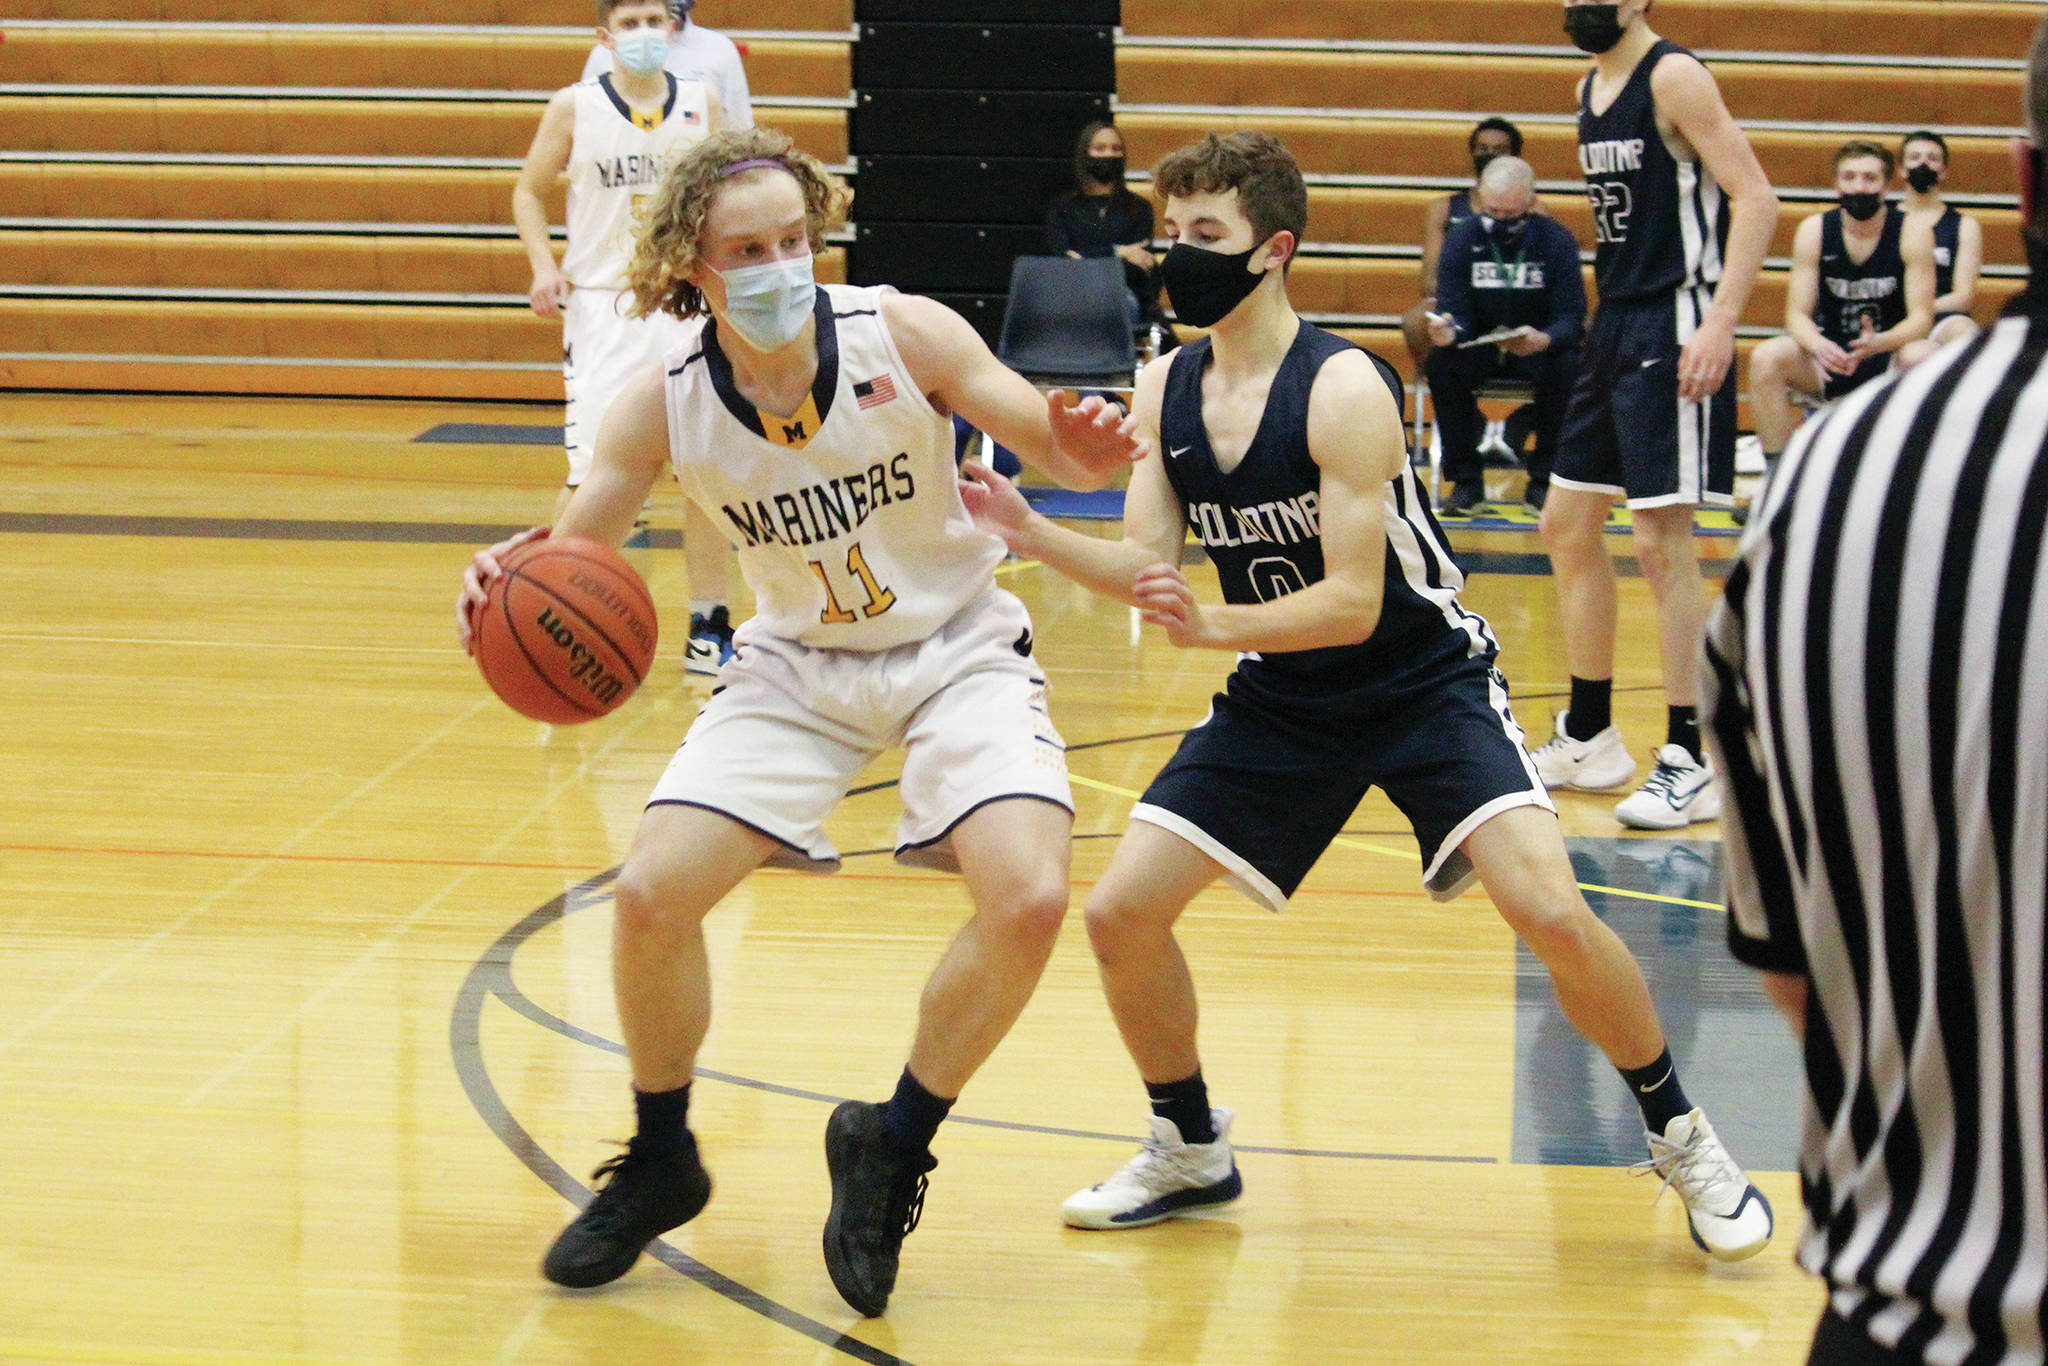 Soldotna’s Zac Buckbee defends against Homer’s Parker Lowney during a Tuesday, March 2, 2021 basketball game in the Alice Witte Gymnasium in Homer, Alaska. (Photo by Megan Pacer/Homer News)